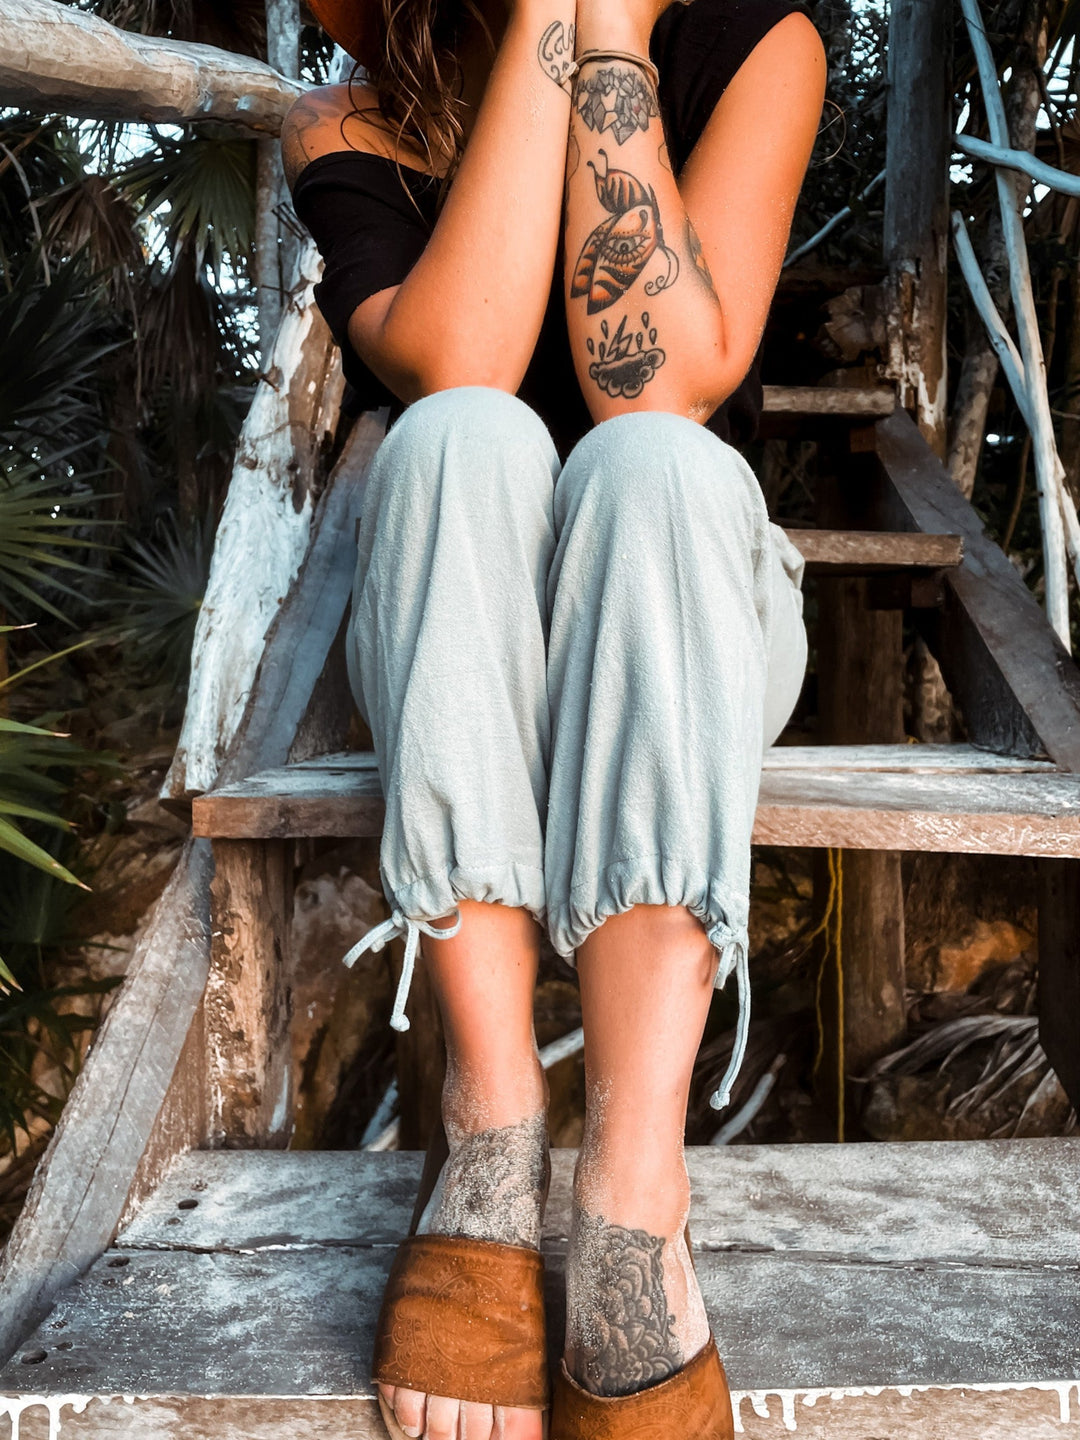 Model sits on stairs showing off light blue joggers with cuffs that have ties. Model has tattoos on feet and forearms.